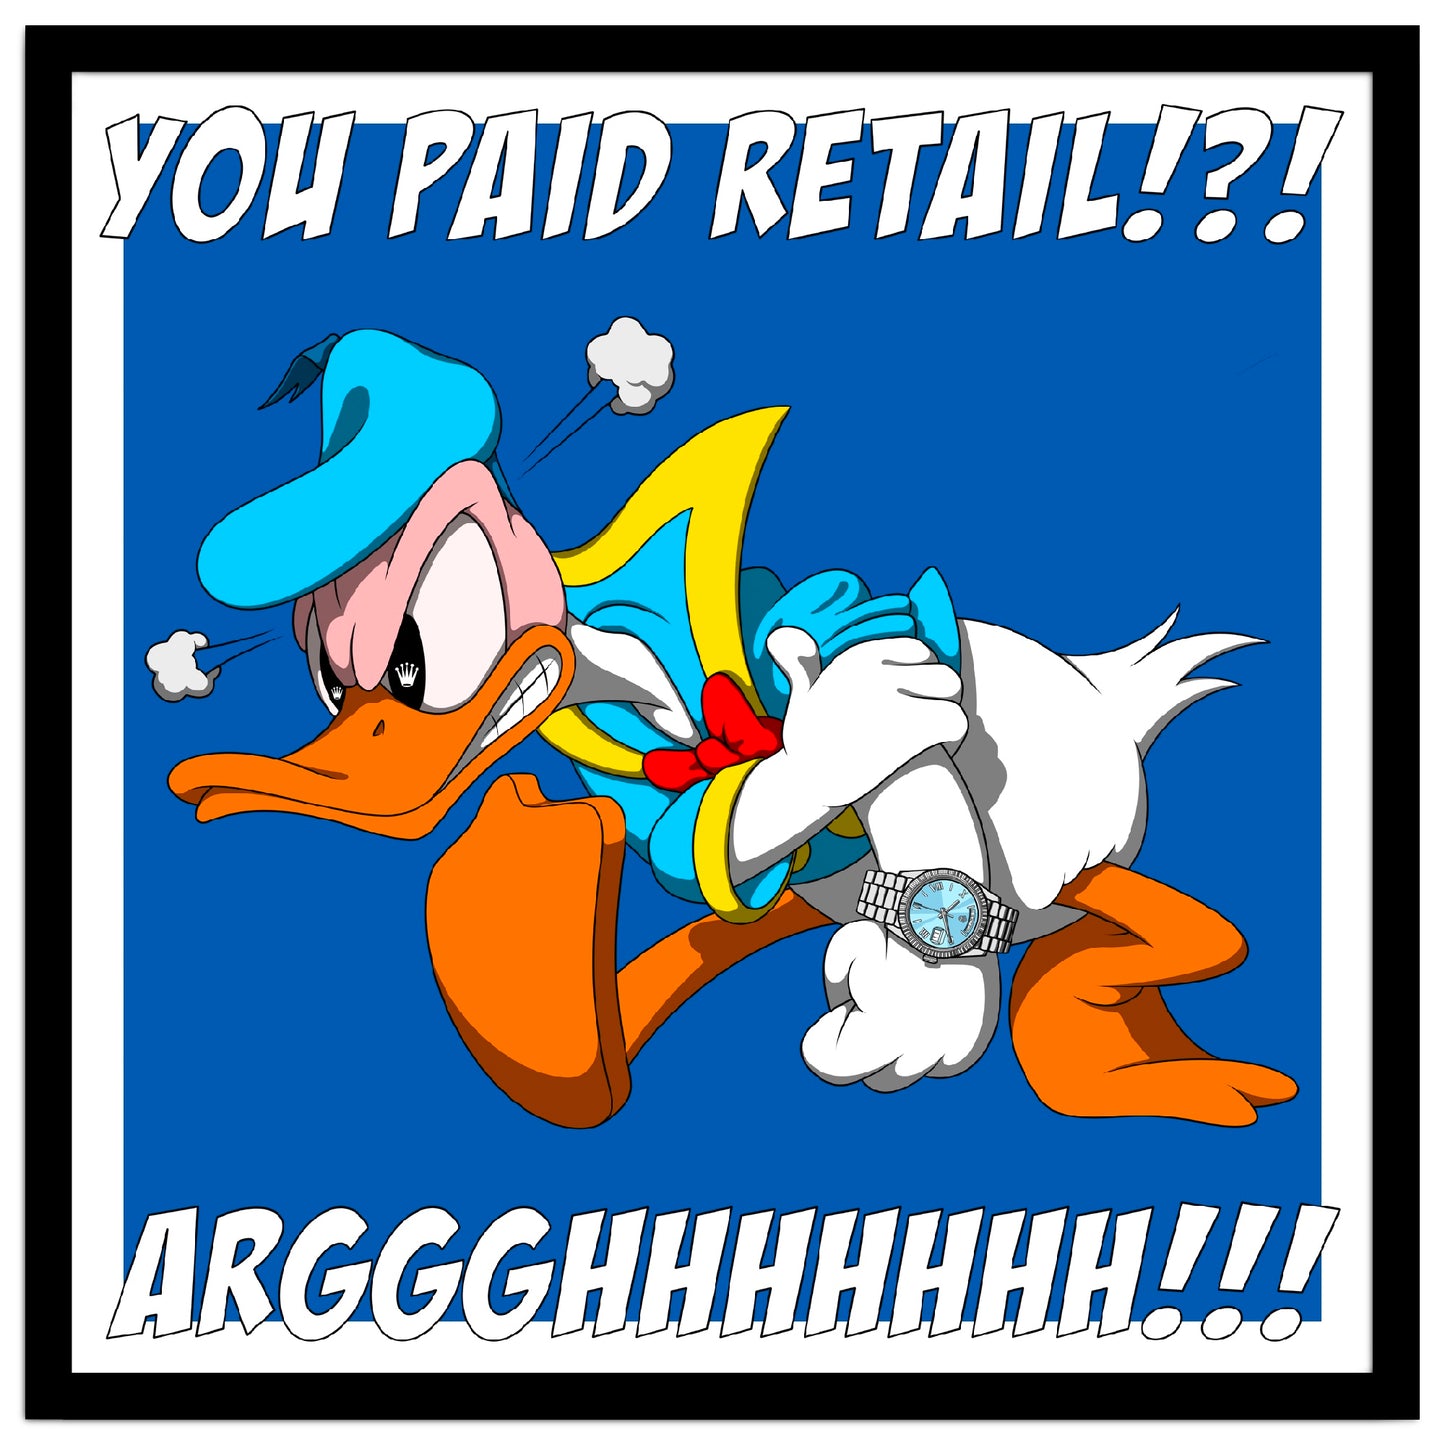 YOU PAID RETAIL!?! - Limited Edition Print